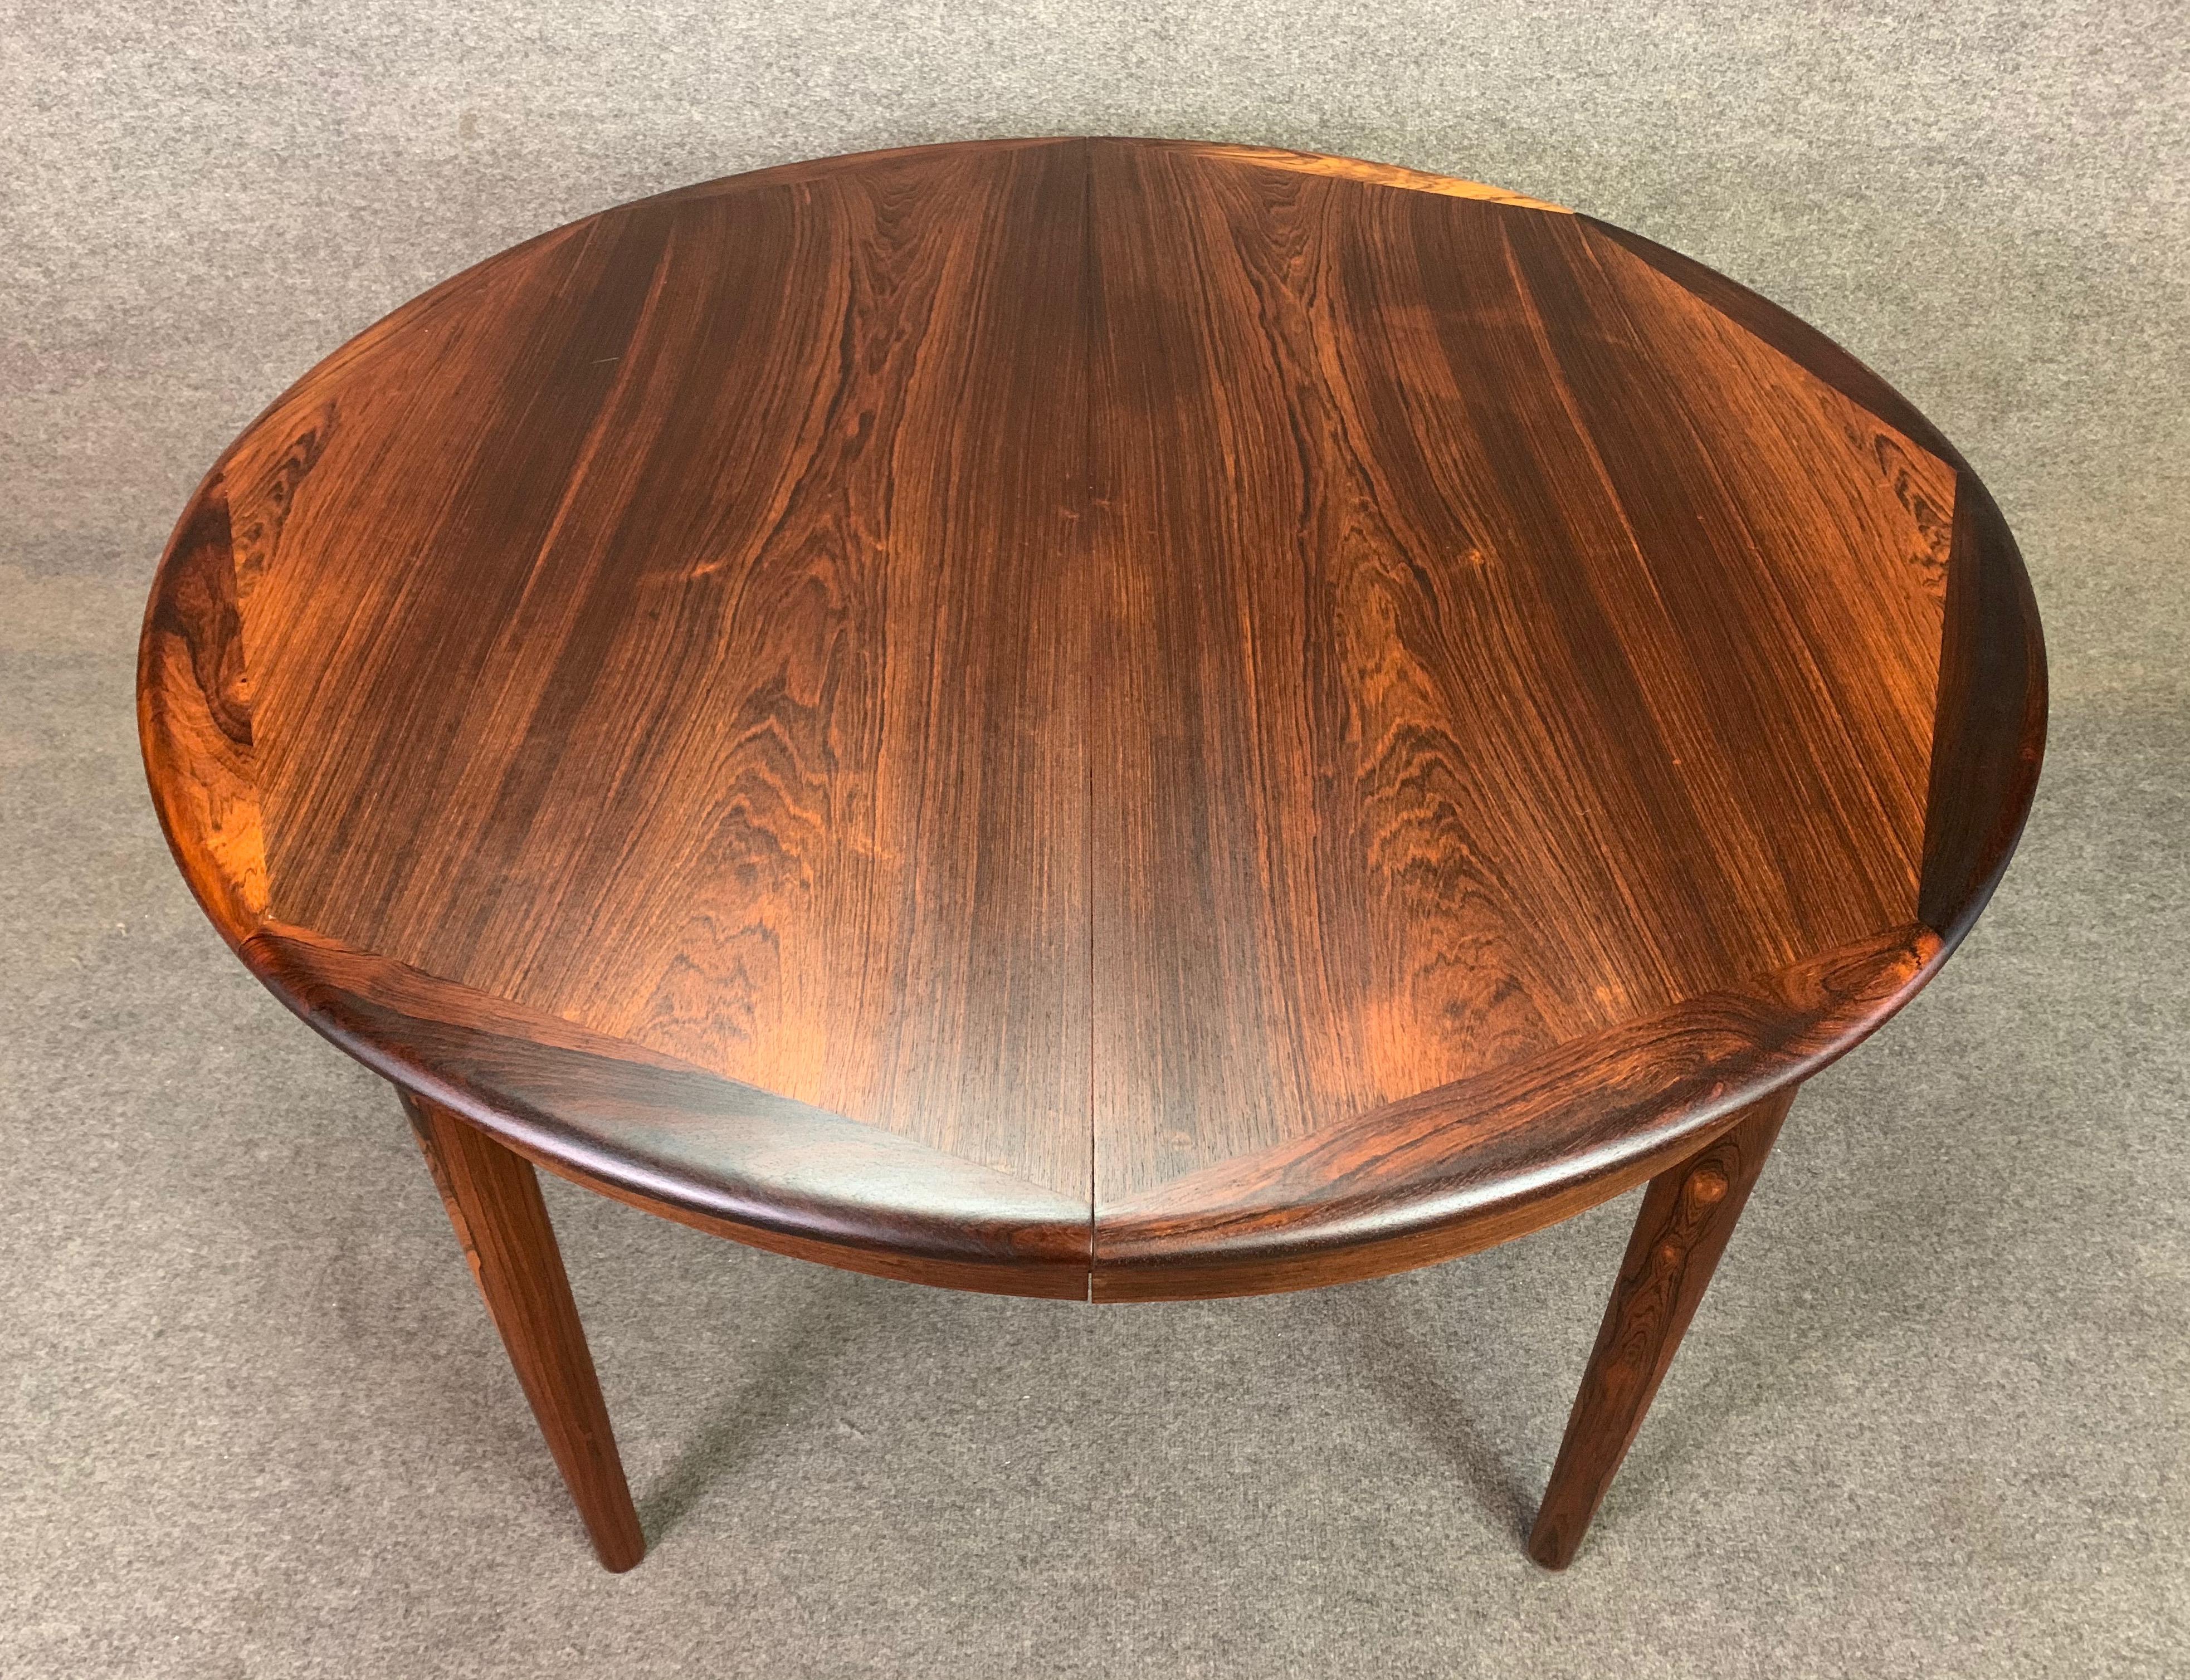 Woodwork Vintage Danish Mid-Century Modern Rosewood Round Dining Table with Leaves